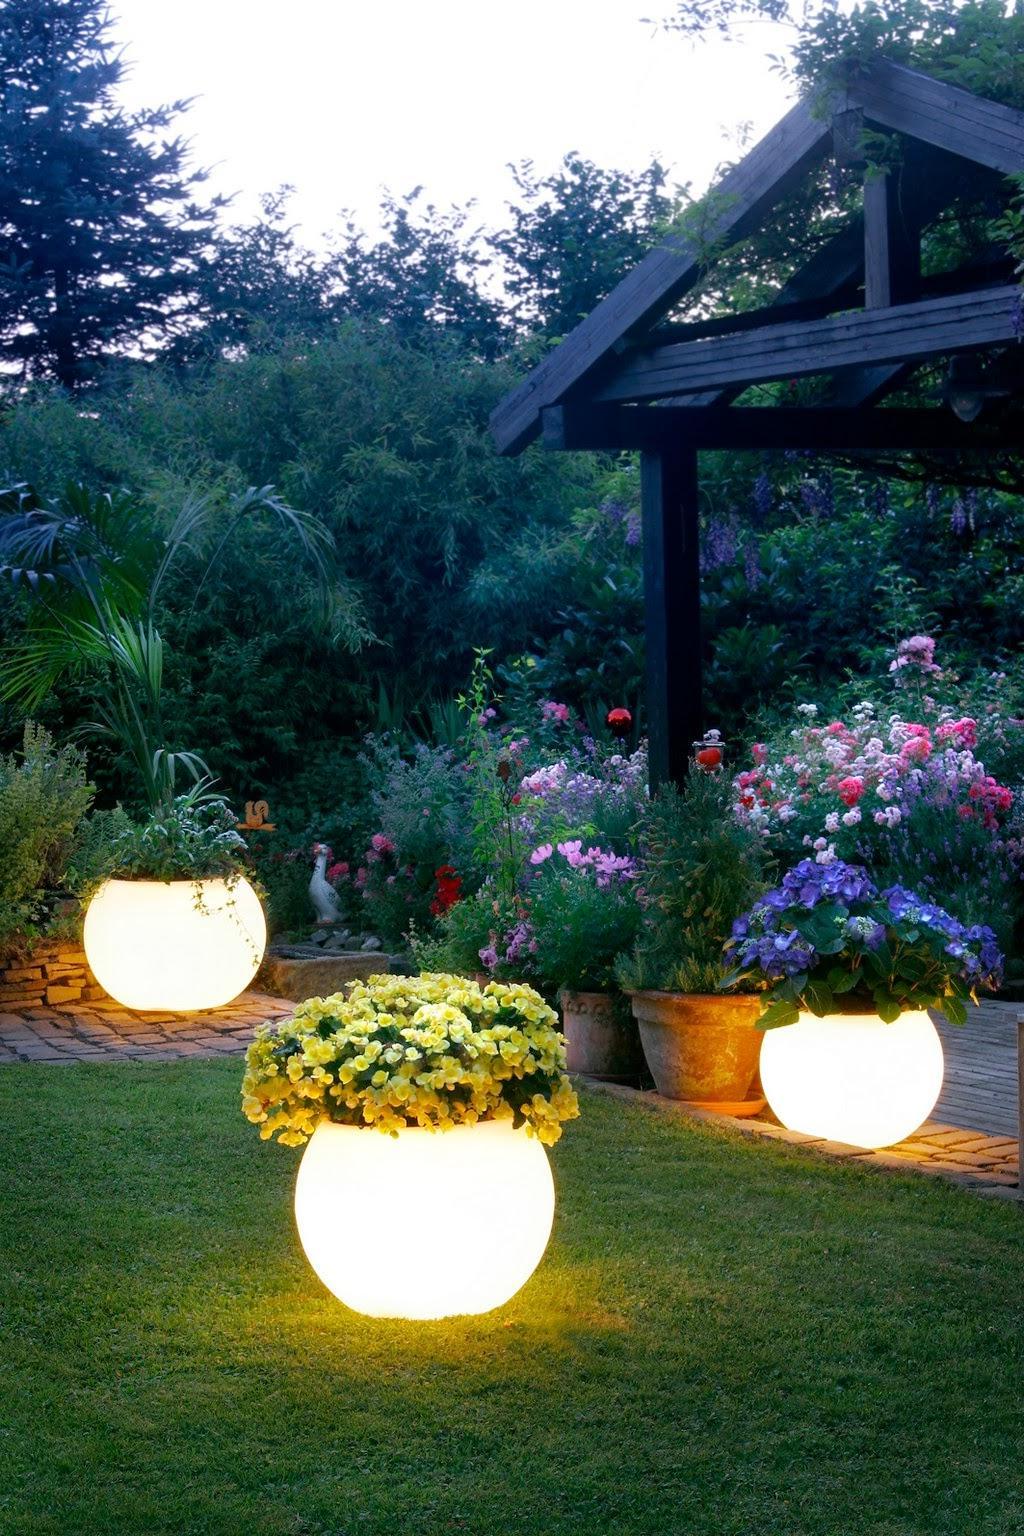 Flowerpots glowing in the dark is a very functional idea, since at night they play the role of lamps and in the daytime they are ordinary flowerpots